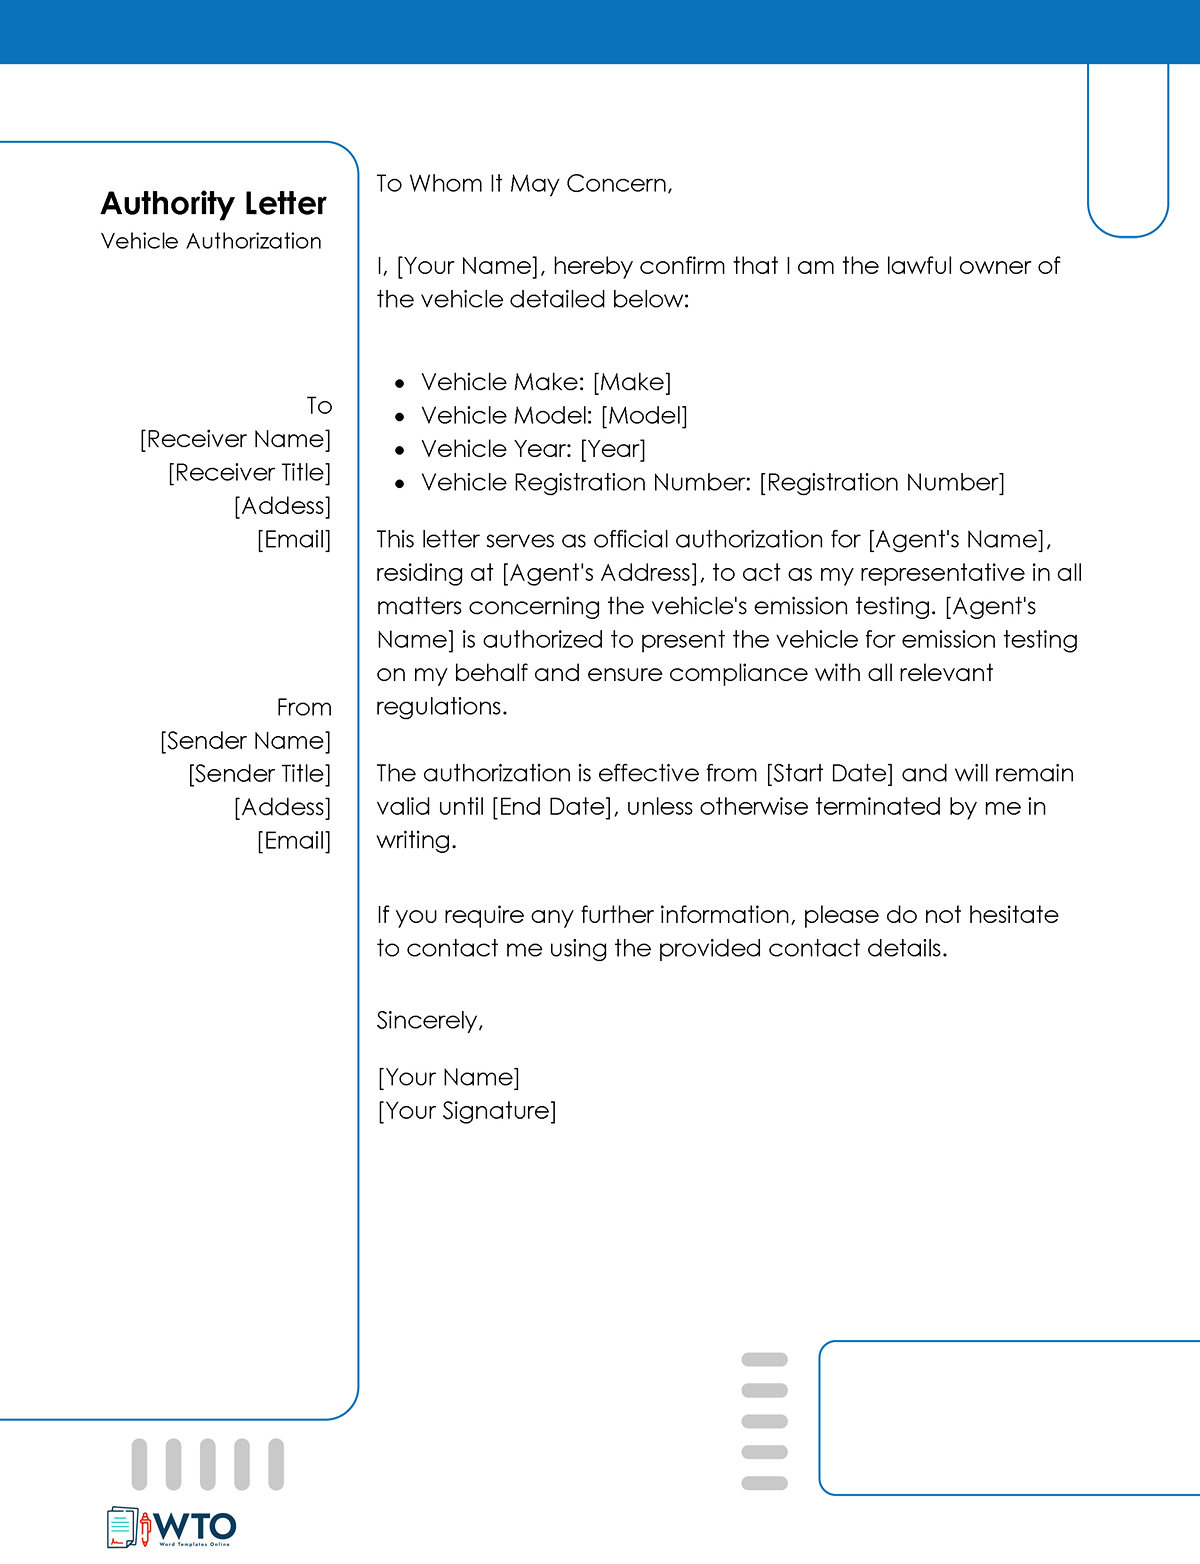 Vehicle Authorization Letter Template-Free in Ms Word